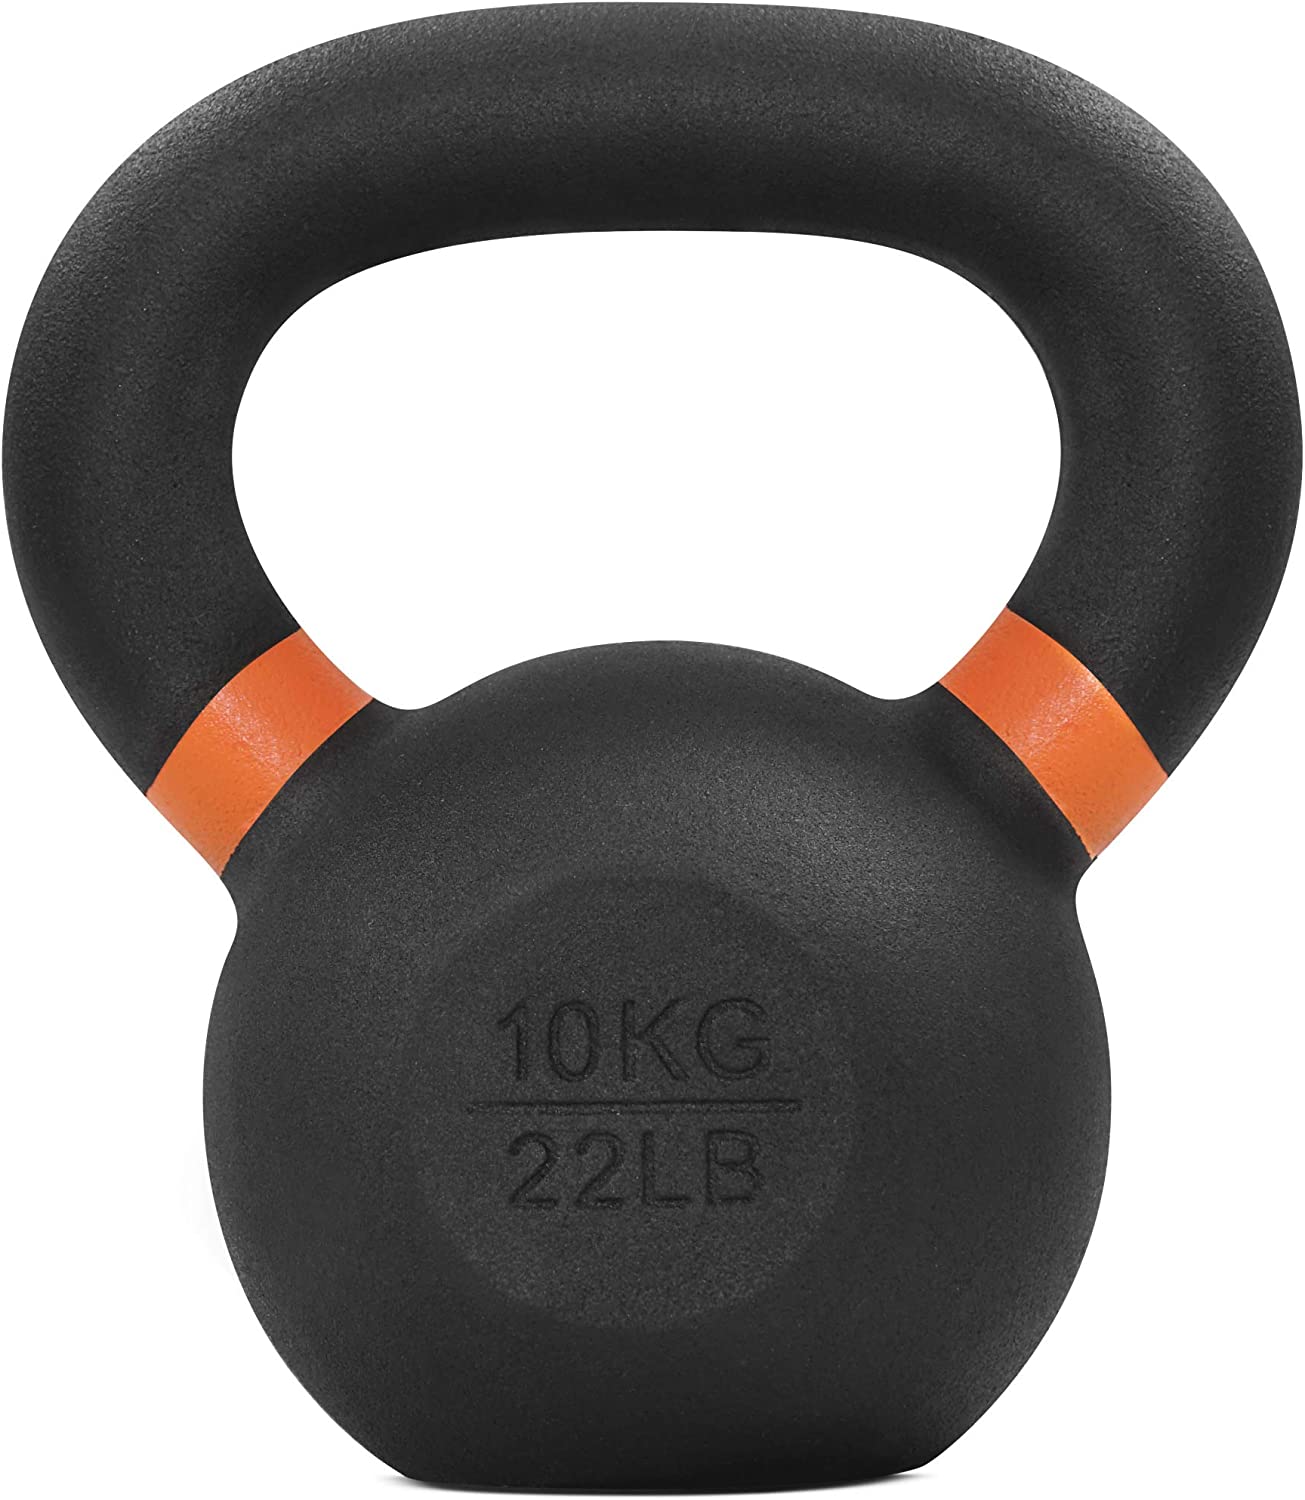 Yes4All 10kg / 22lb Powder Coated Kettlebell, Single - image 1 of 8